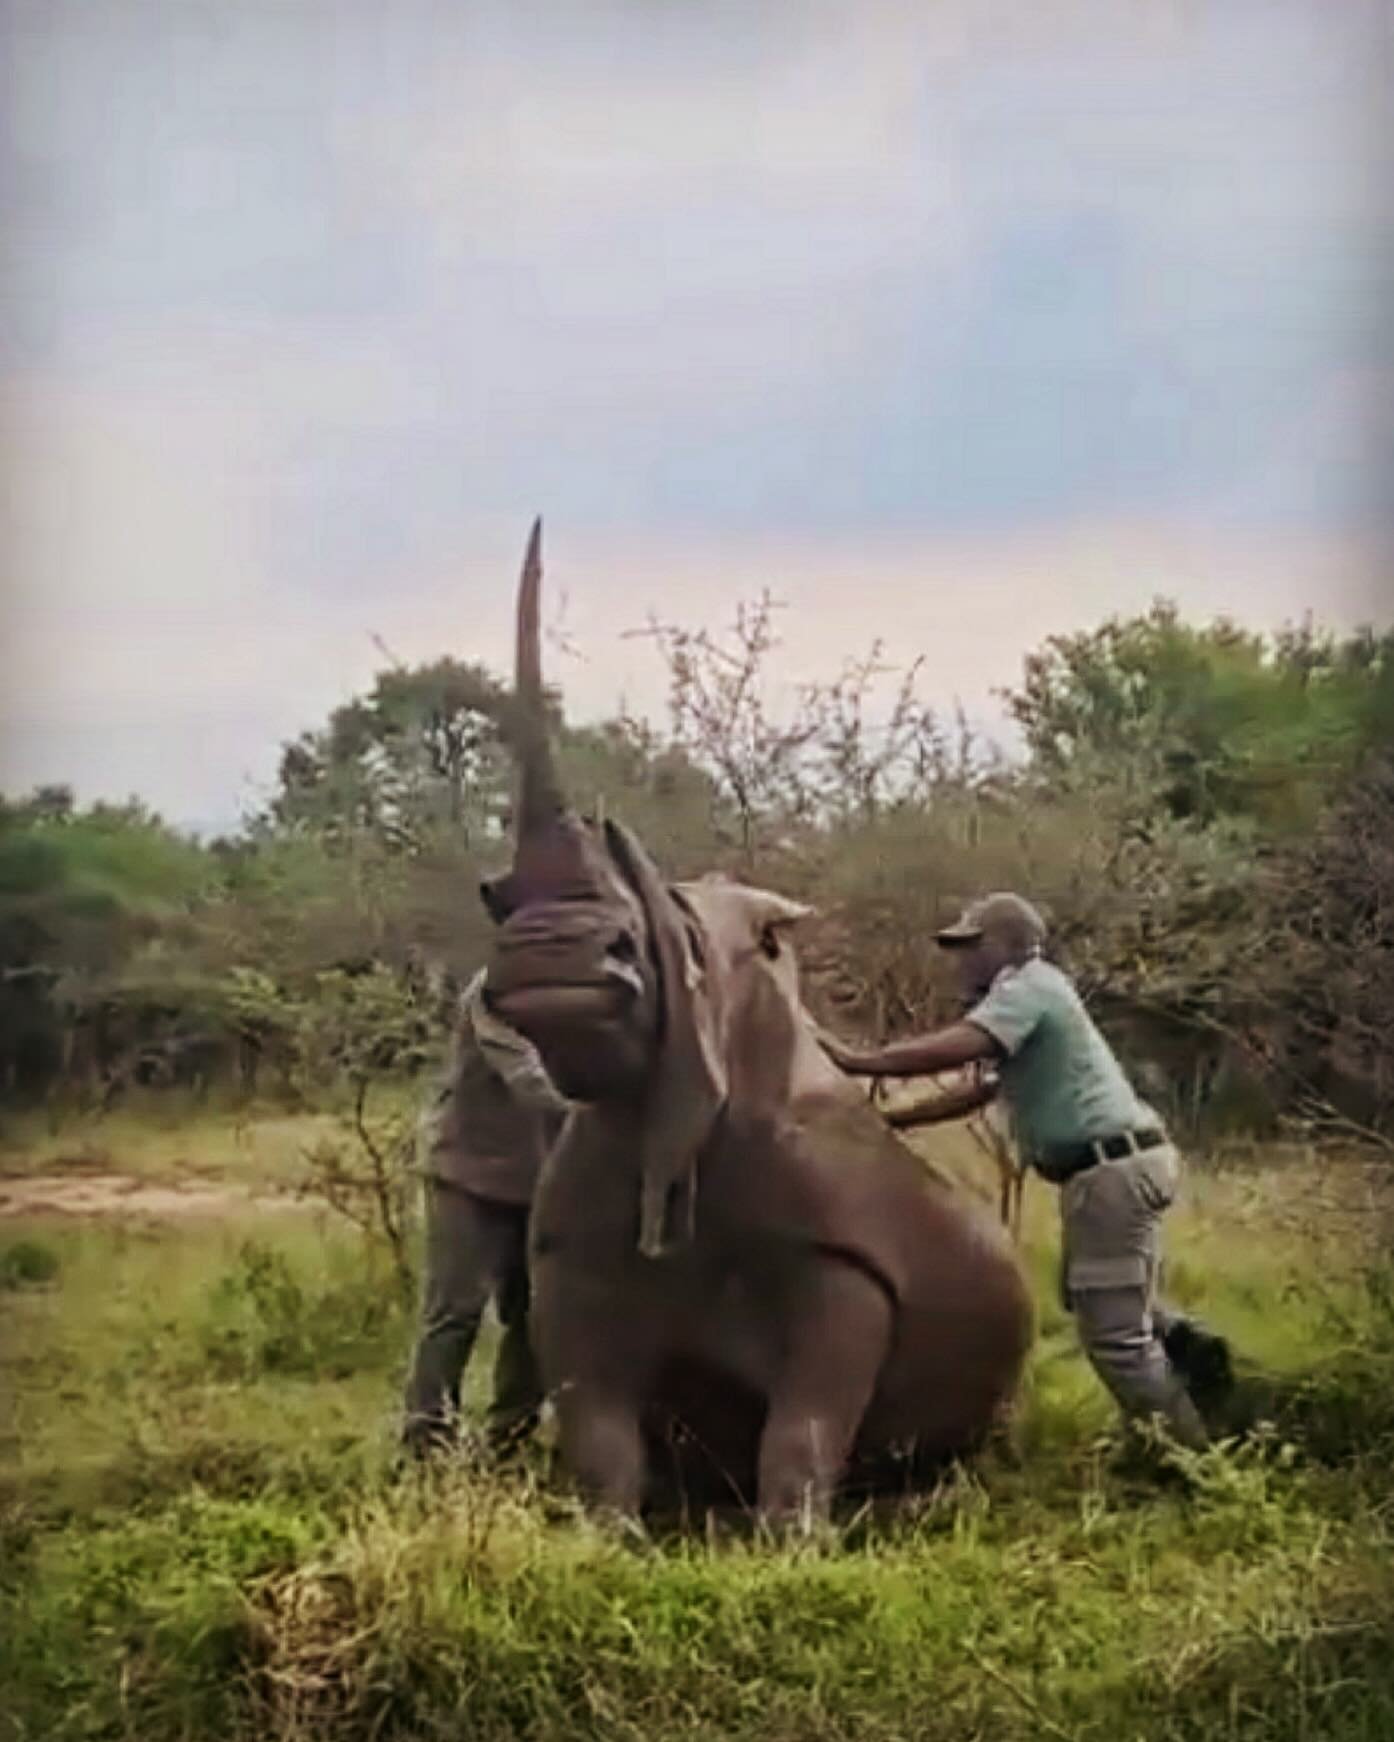 Finally the decision has been made, money raised, action taken to trim horns at Hluhluwe after an alarming increase of poaching.. Well Done 👊🏻
#racingextinction #myhornisnotmedicine 
#saveourrhinos #horntrimming #theygrowback #africannationalparks 